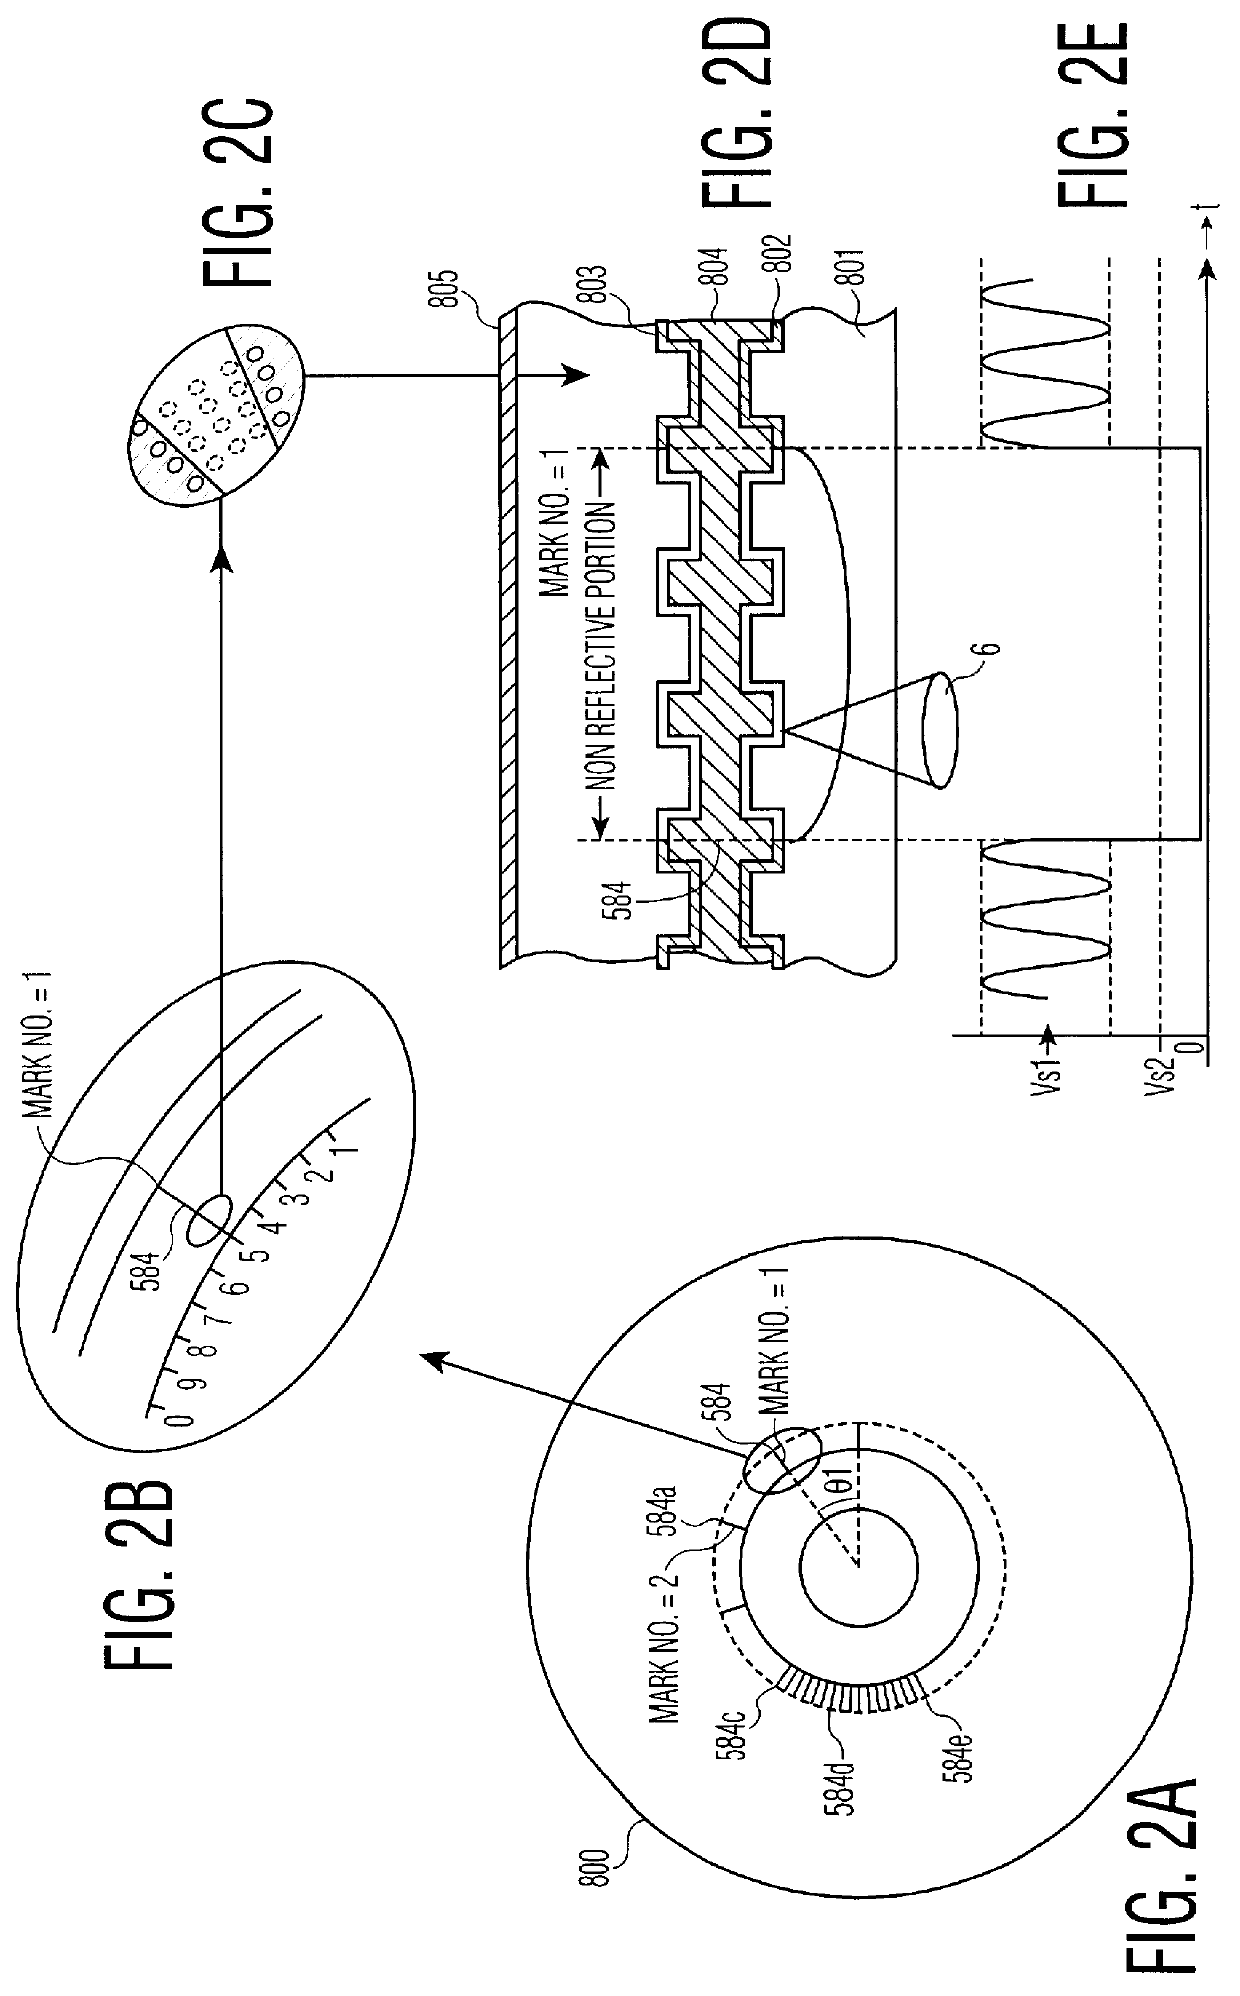 Optical disk, optical disk barcode forming method, optical disk reproduction apparatus, a marking forming apparatus, a method of forming a laser marking on an optical disk, and a method of manufacturing an optical disk